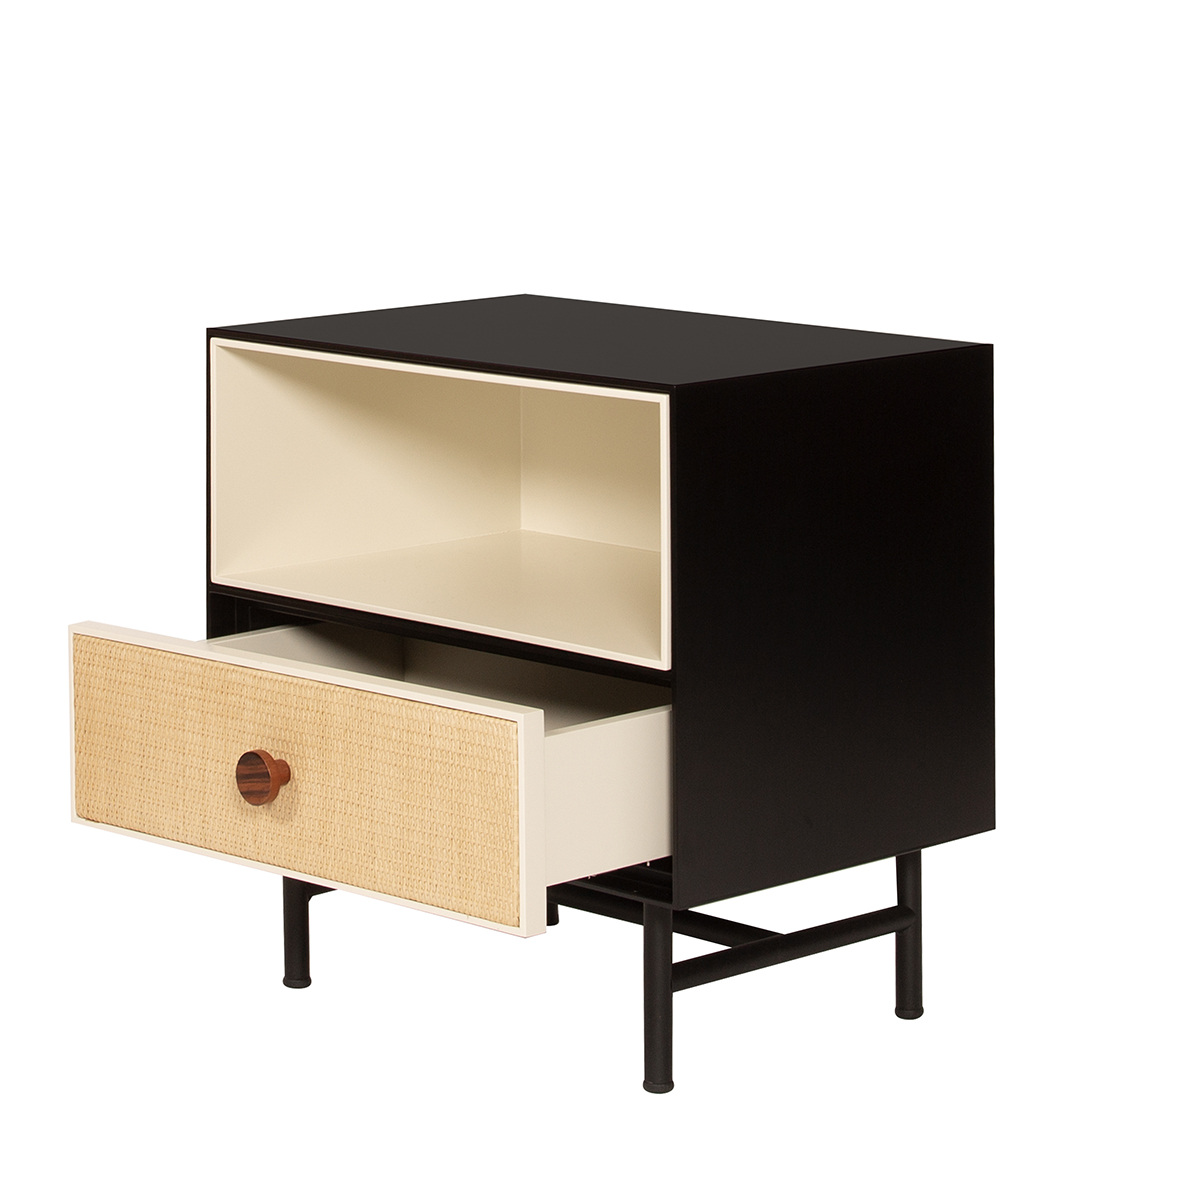 Bedside Table Essence, Black / Ivory - LL55 x W38 x H55 cm - Lacquered wood - image 2